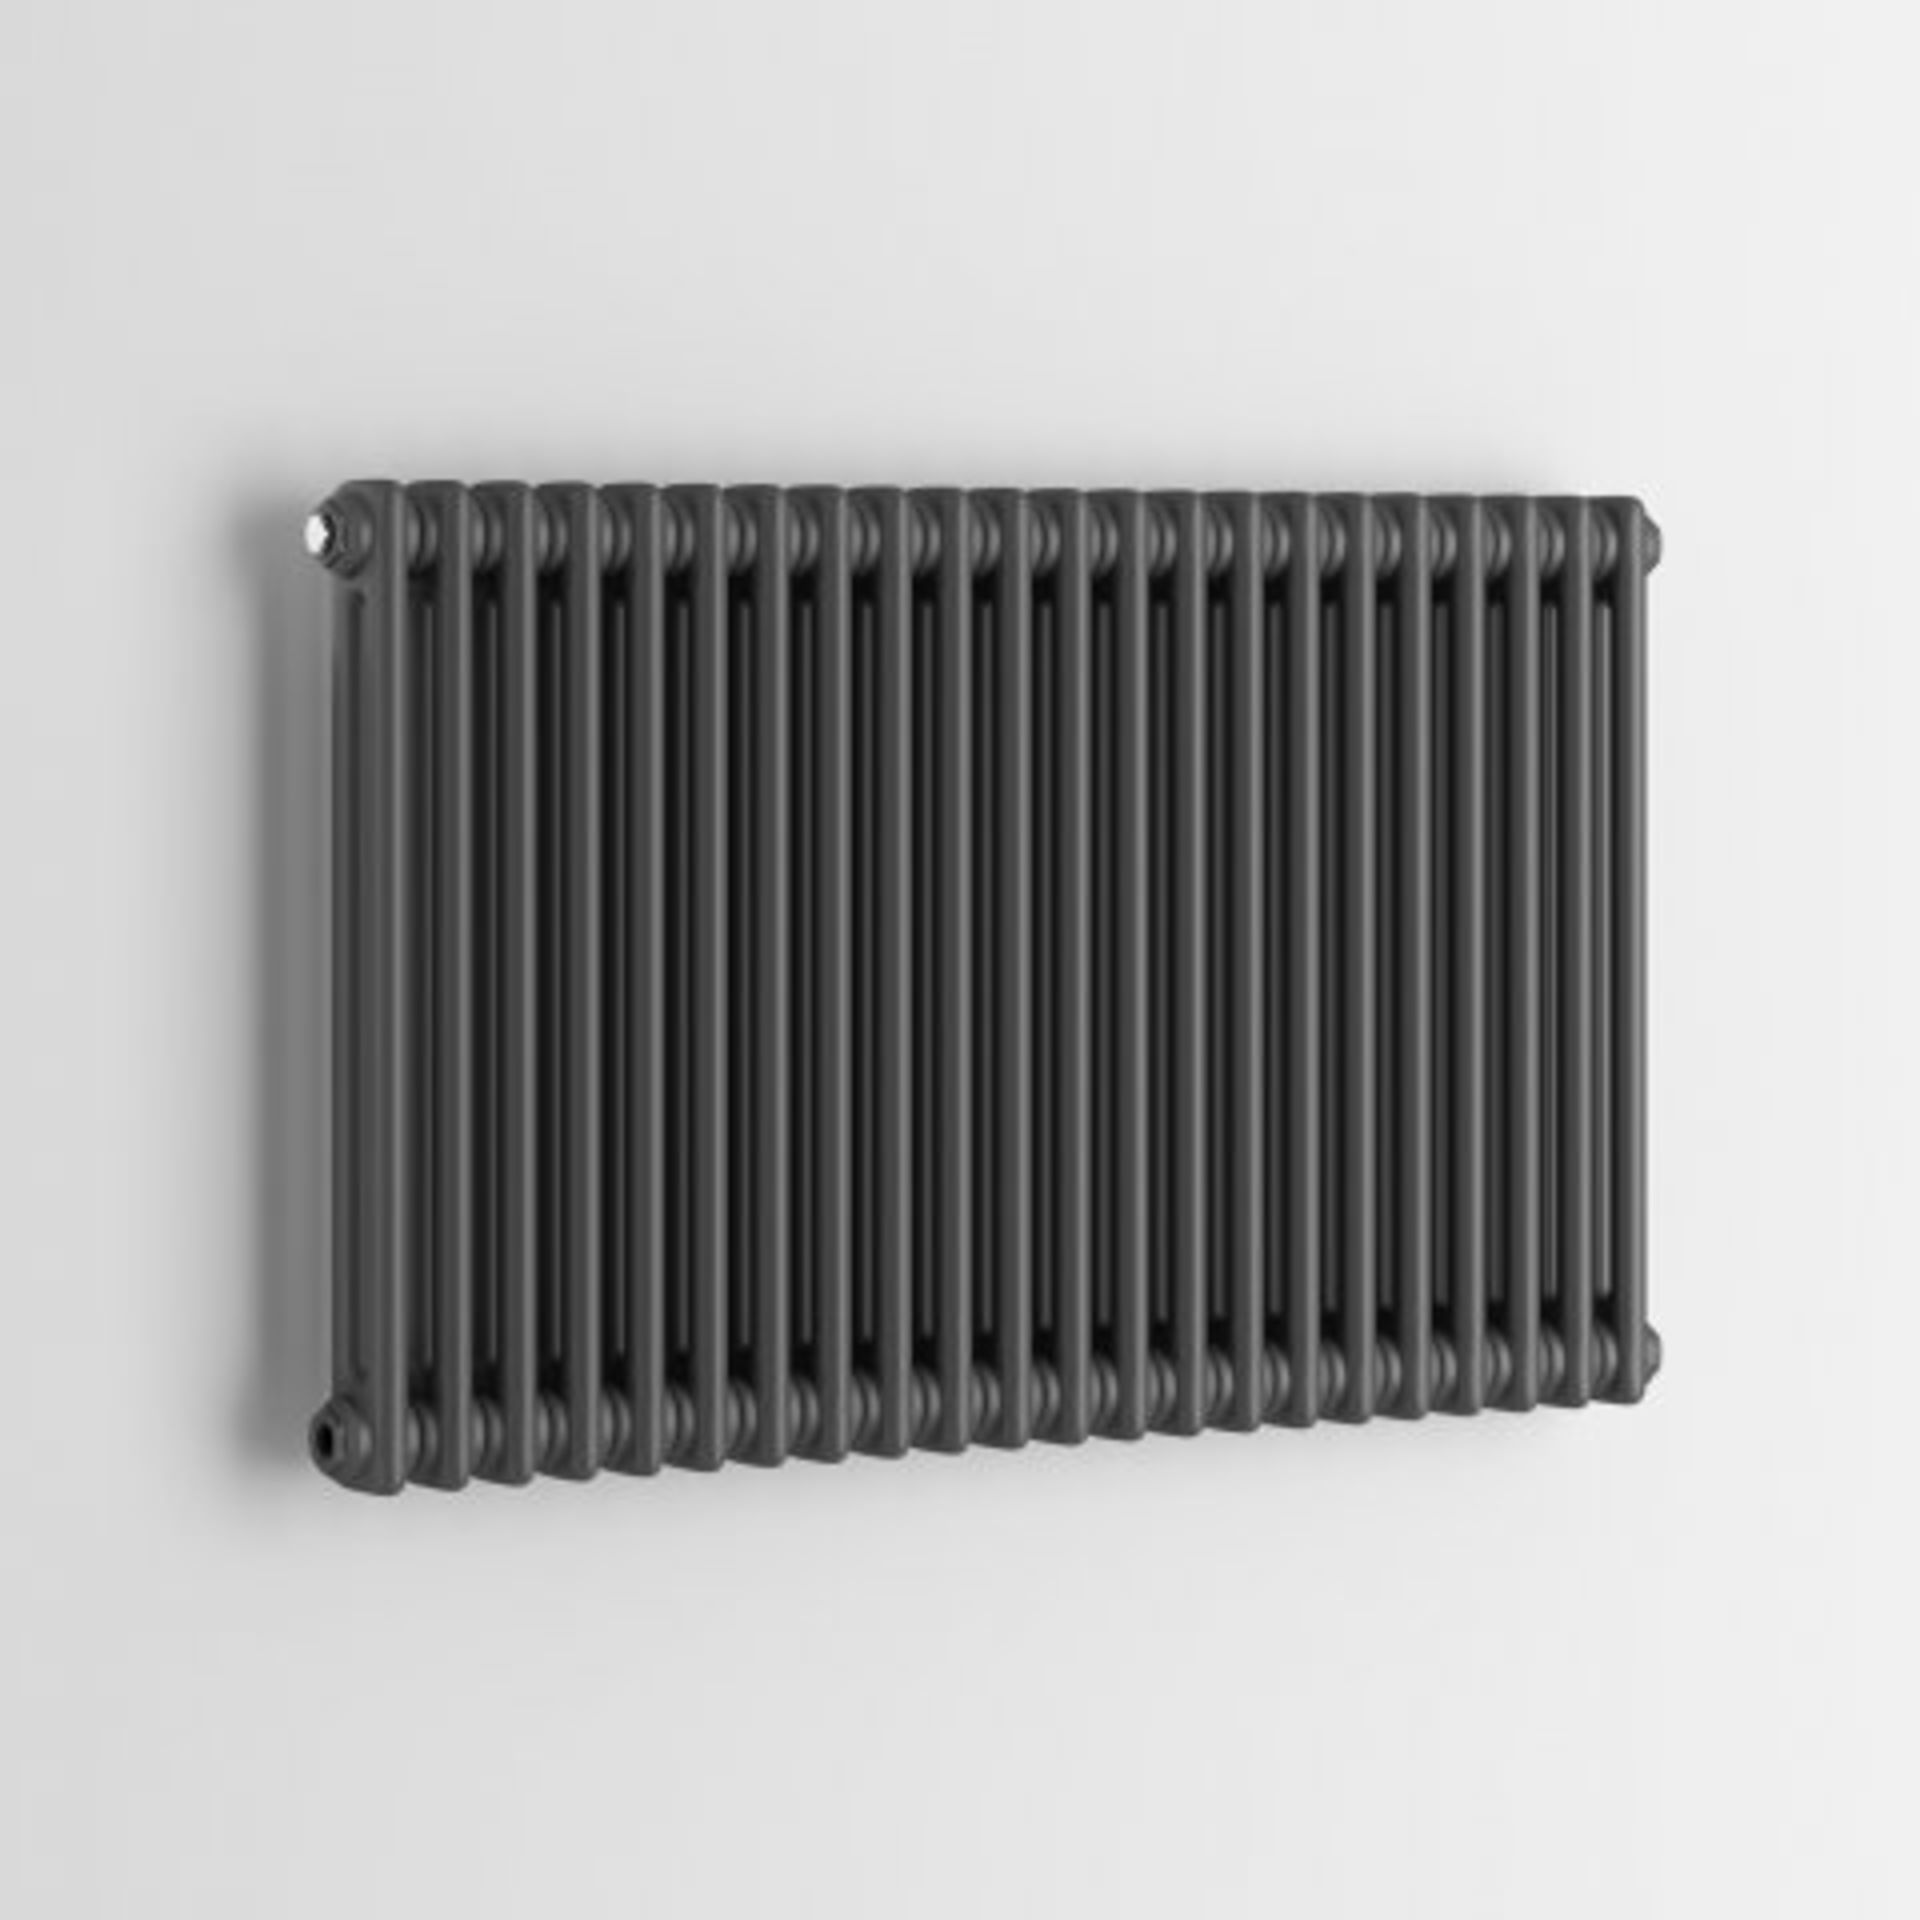 (O97) 600x1008 Anthracite Double Panel Horizontal Colosseum Traditional Radiator. RRP £524.99. - Image 4 of 5